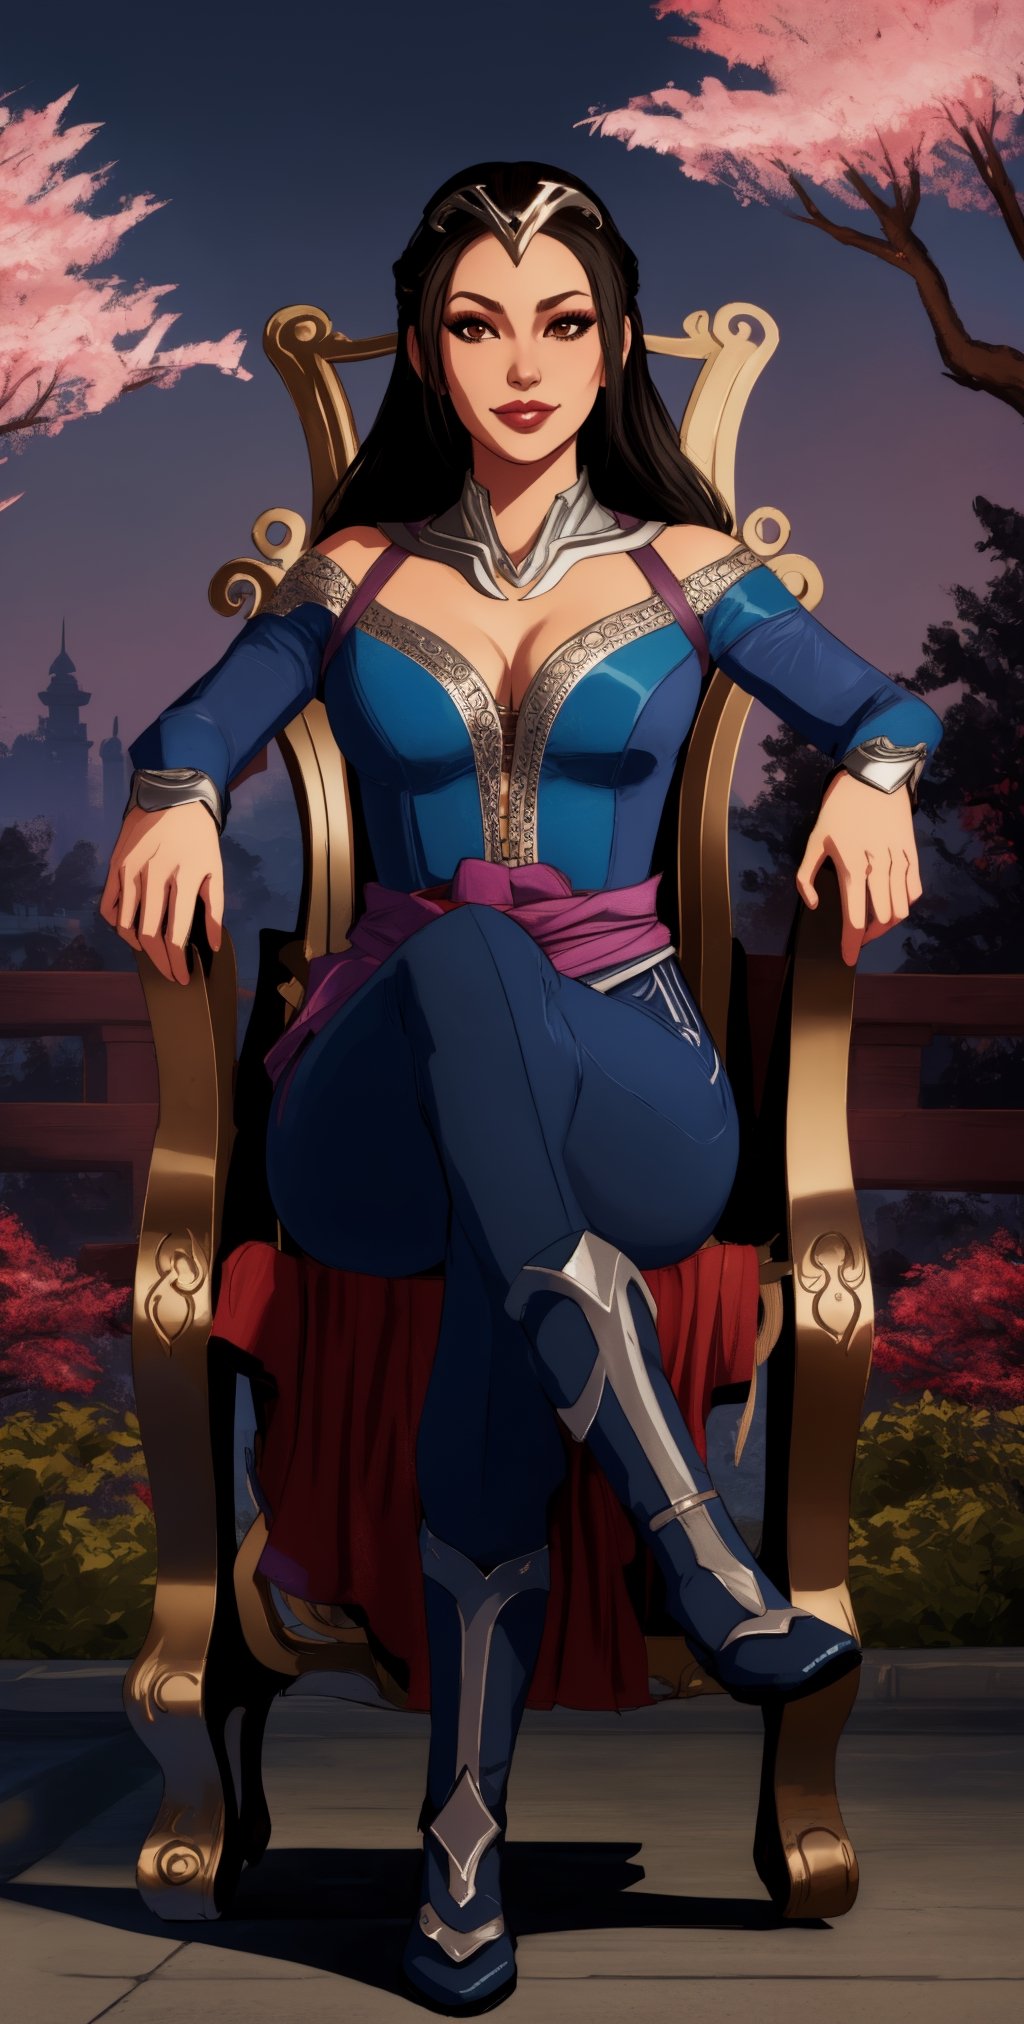 KitanaMK1, tiara, long black hair, brown eyes, lips, jewelry, blue dress, cleavage, blue  pants, pelvic curtain, looking at viewer, serious, smirk,
sitting, on fancy throne chair, crossing legs, outside, palace garden, cherry blossom, dusk, twilight sky, extreme detail, hdr, beautiful quality,  